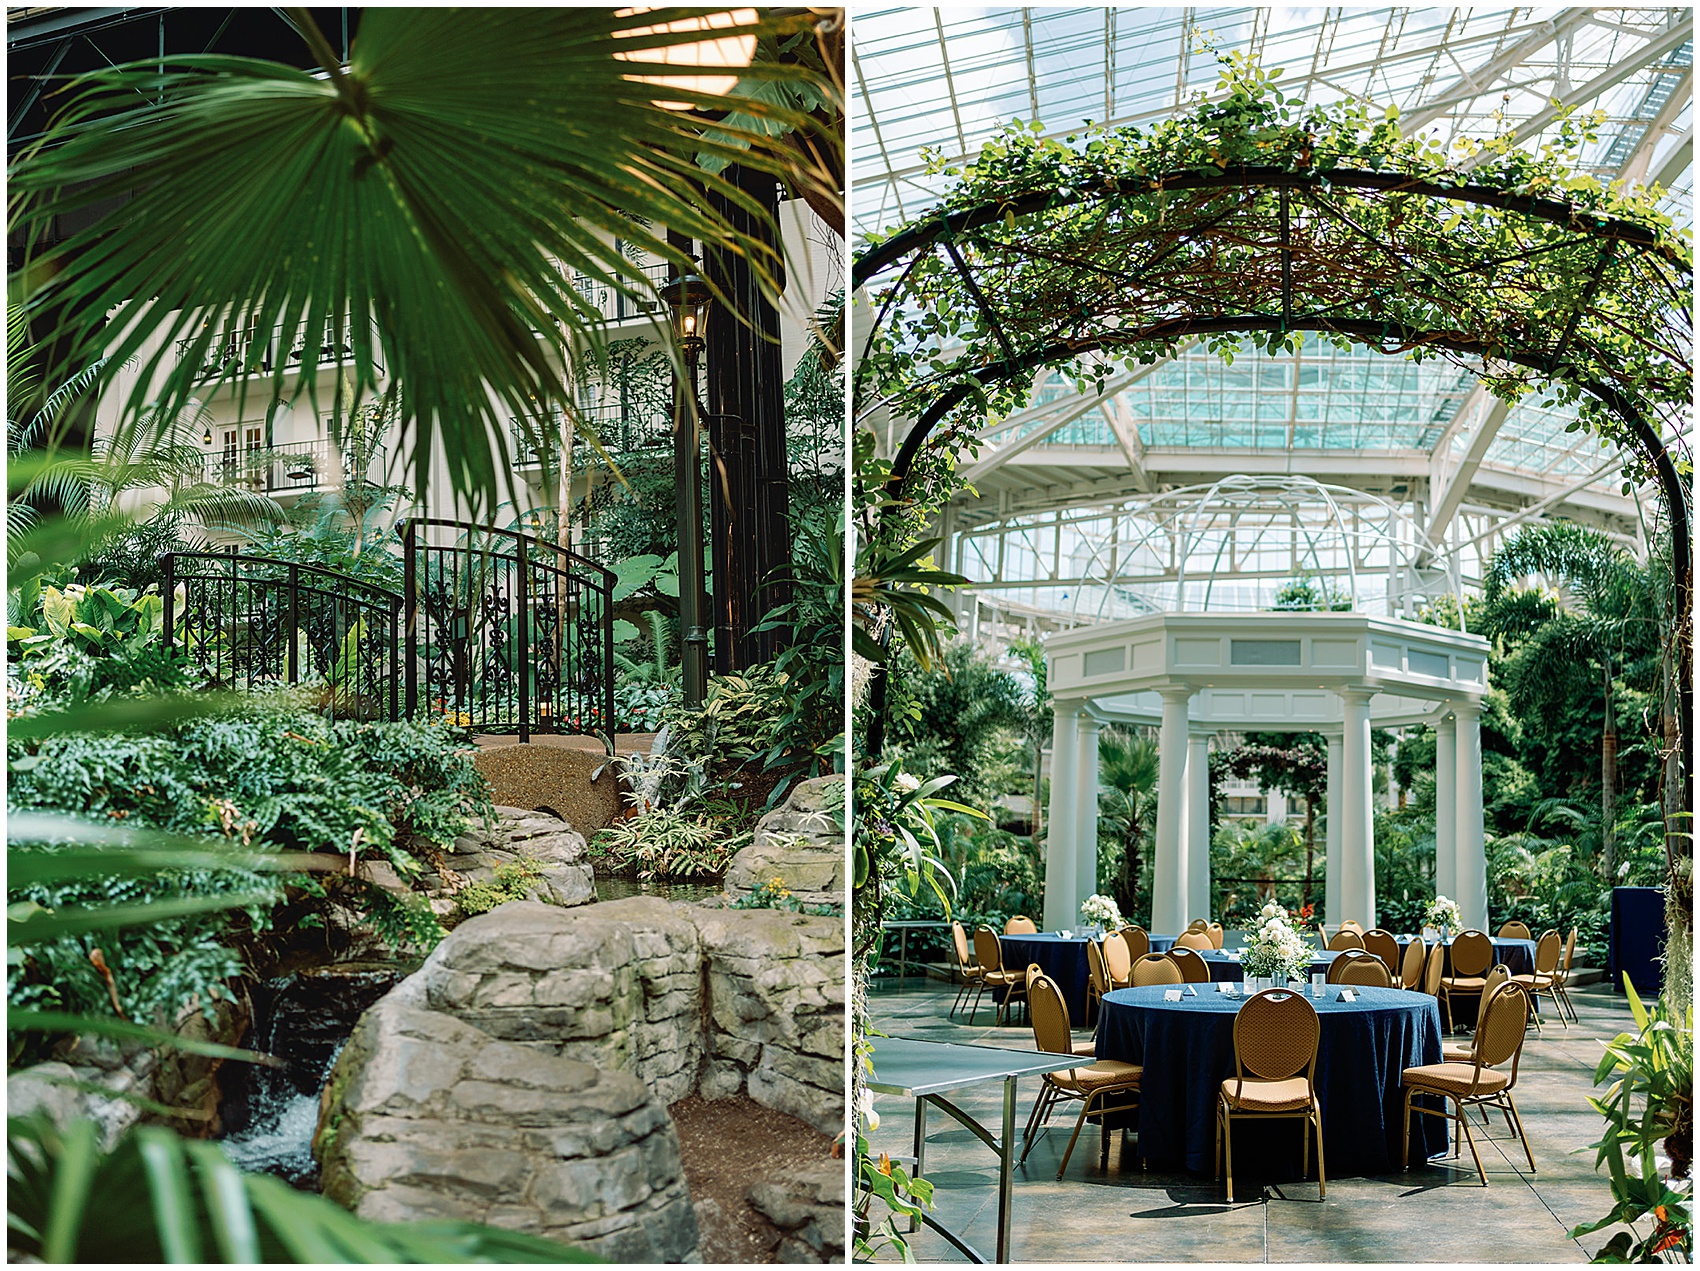 Details of the gaylord opryland wedding reception venue in a tropical greenhouse garden